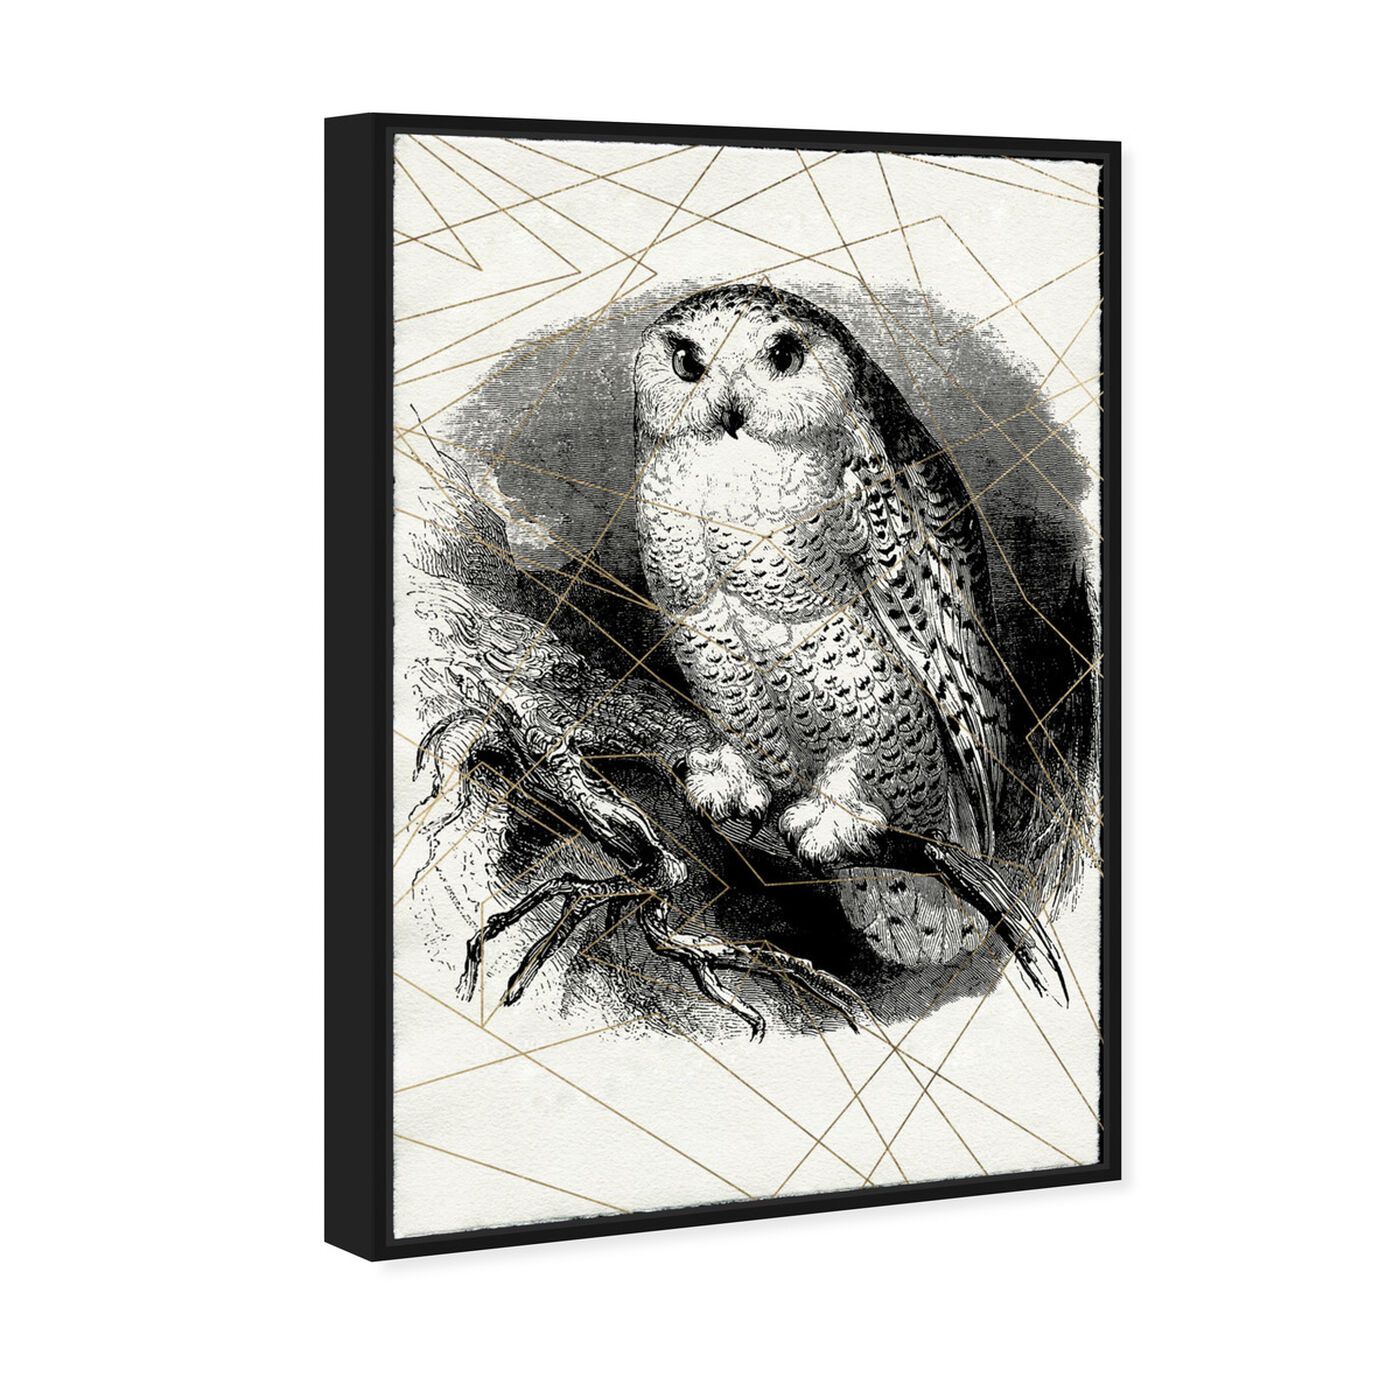 Angled view of Owl Print featuring animals and birds art.